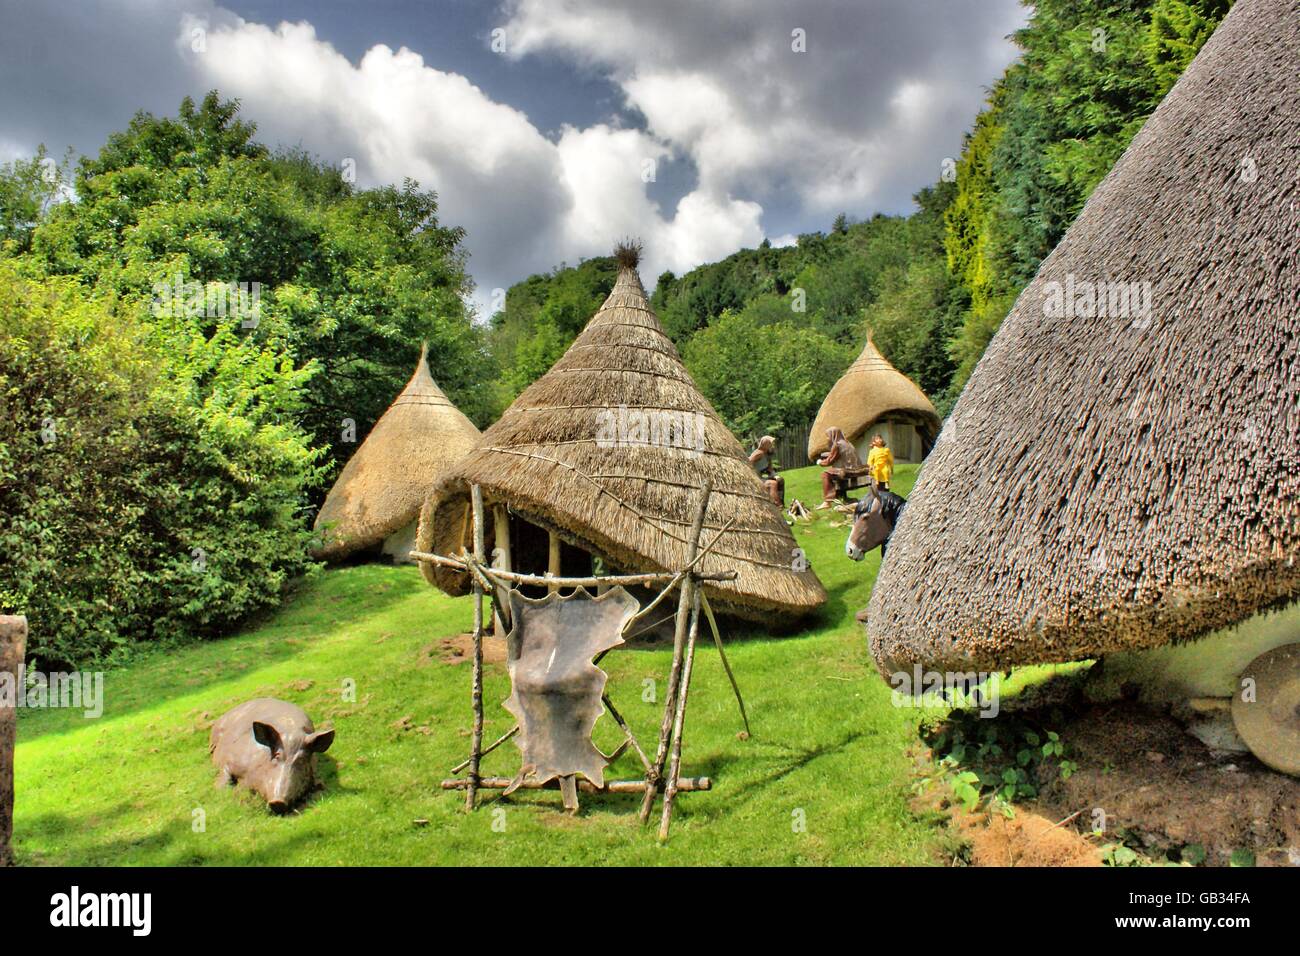 Ancient Britain - How the Britons lived before and during the Roman conquest of the British lands. Thatched roof of straw. Stock Photo